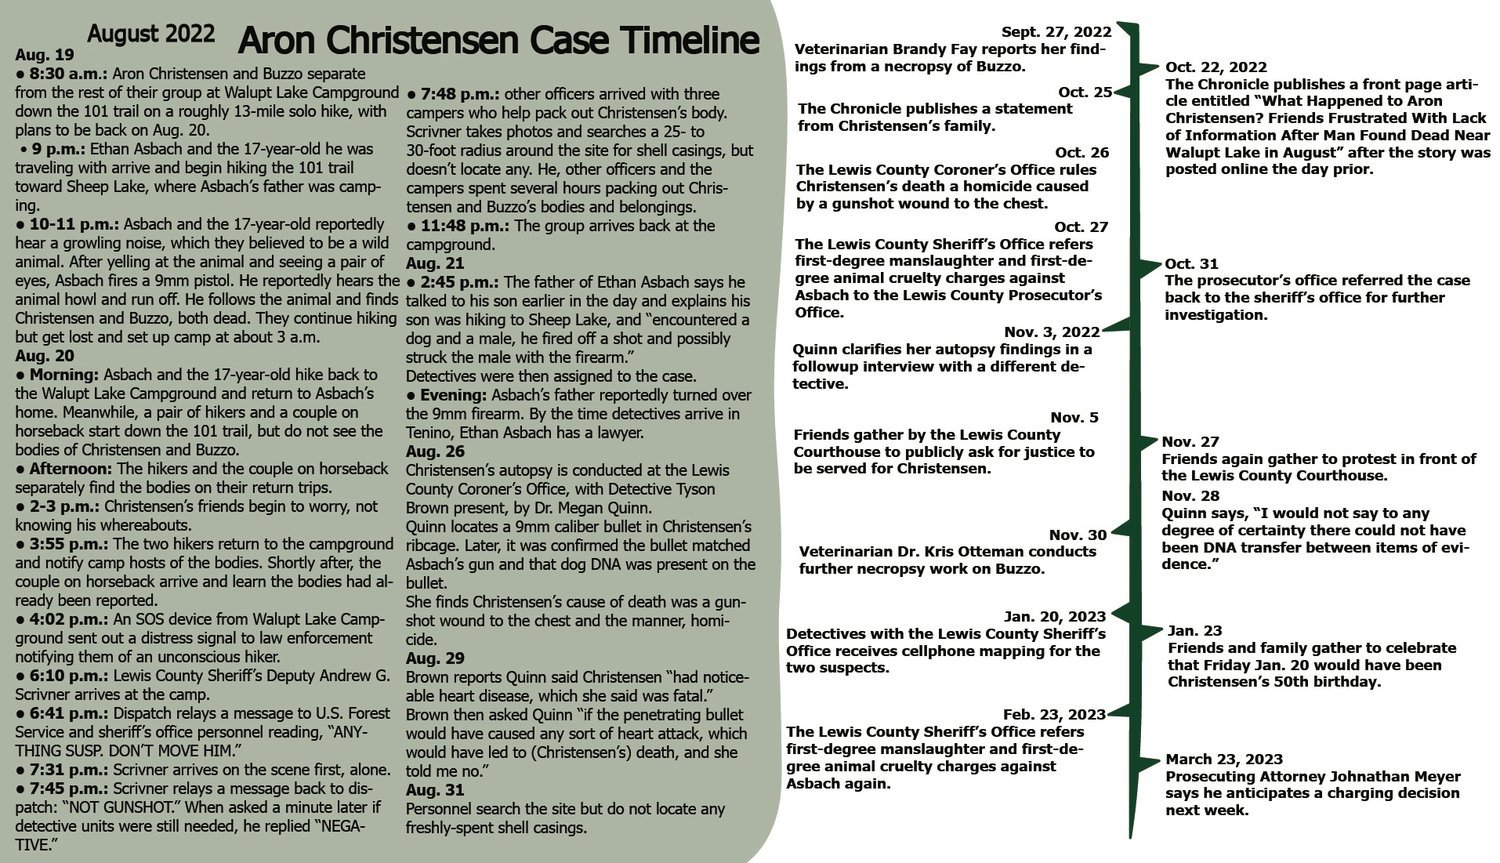 This timeline includes key developments between the time Aron Christensen went for a walk near Walupt Lake in August until just before Lewis County Prosecutor Jonathan Meyer announced he would not file charges in Christensen's death due to issues with the investigation by the Lewis County Sheriff's Office.